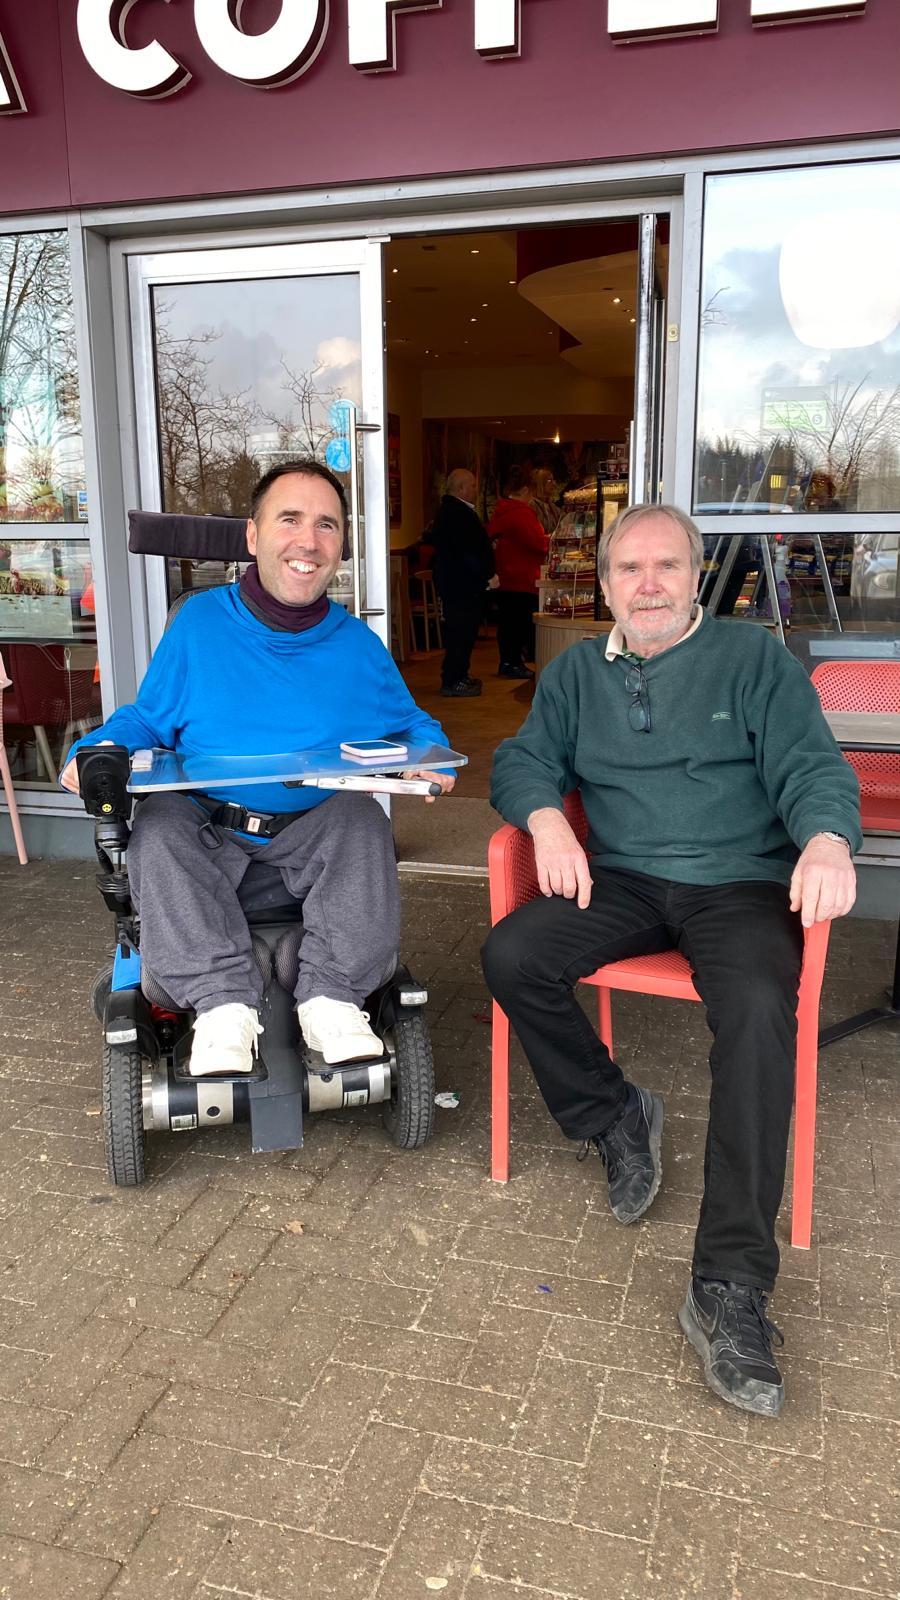 Martyn is a white male with short brown hair wearing a light blue hoody, grey trousers and white converse shoes, he's sat in his wheelchair next to Dave a white male with short brown hair, a beard, green jumper, black trousers and shoes sat on a red chair outside a cafe